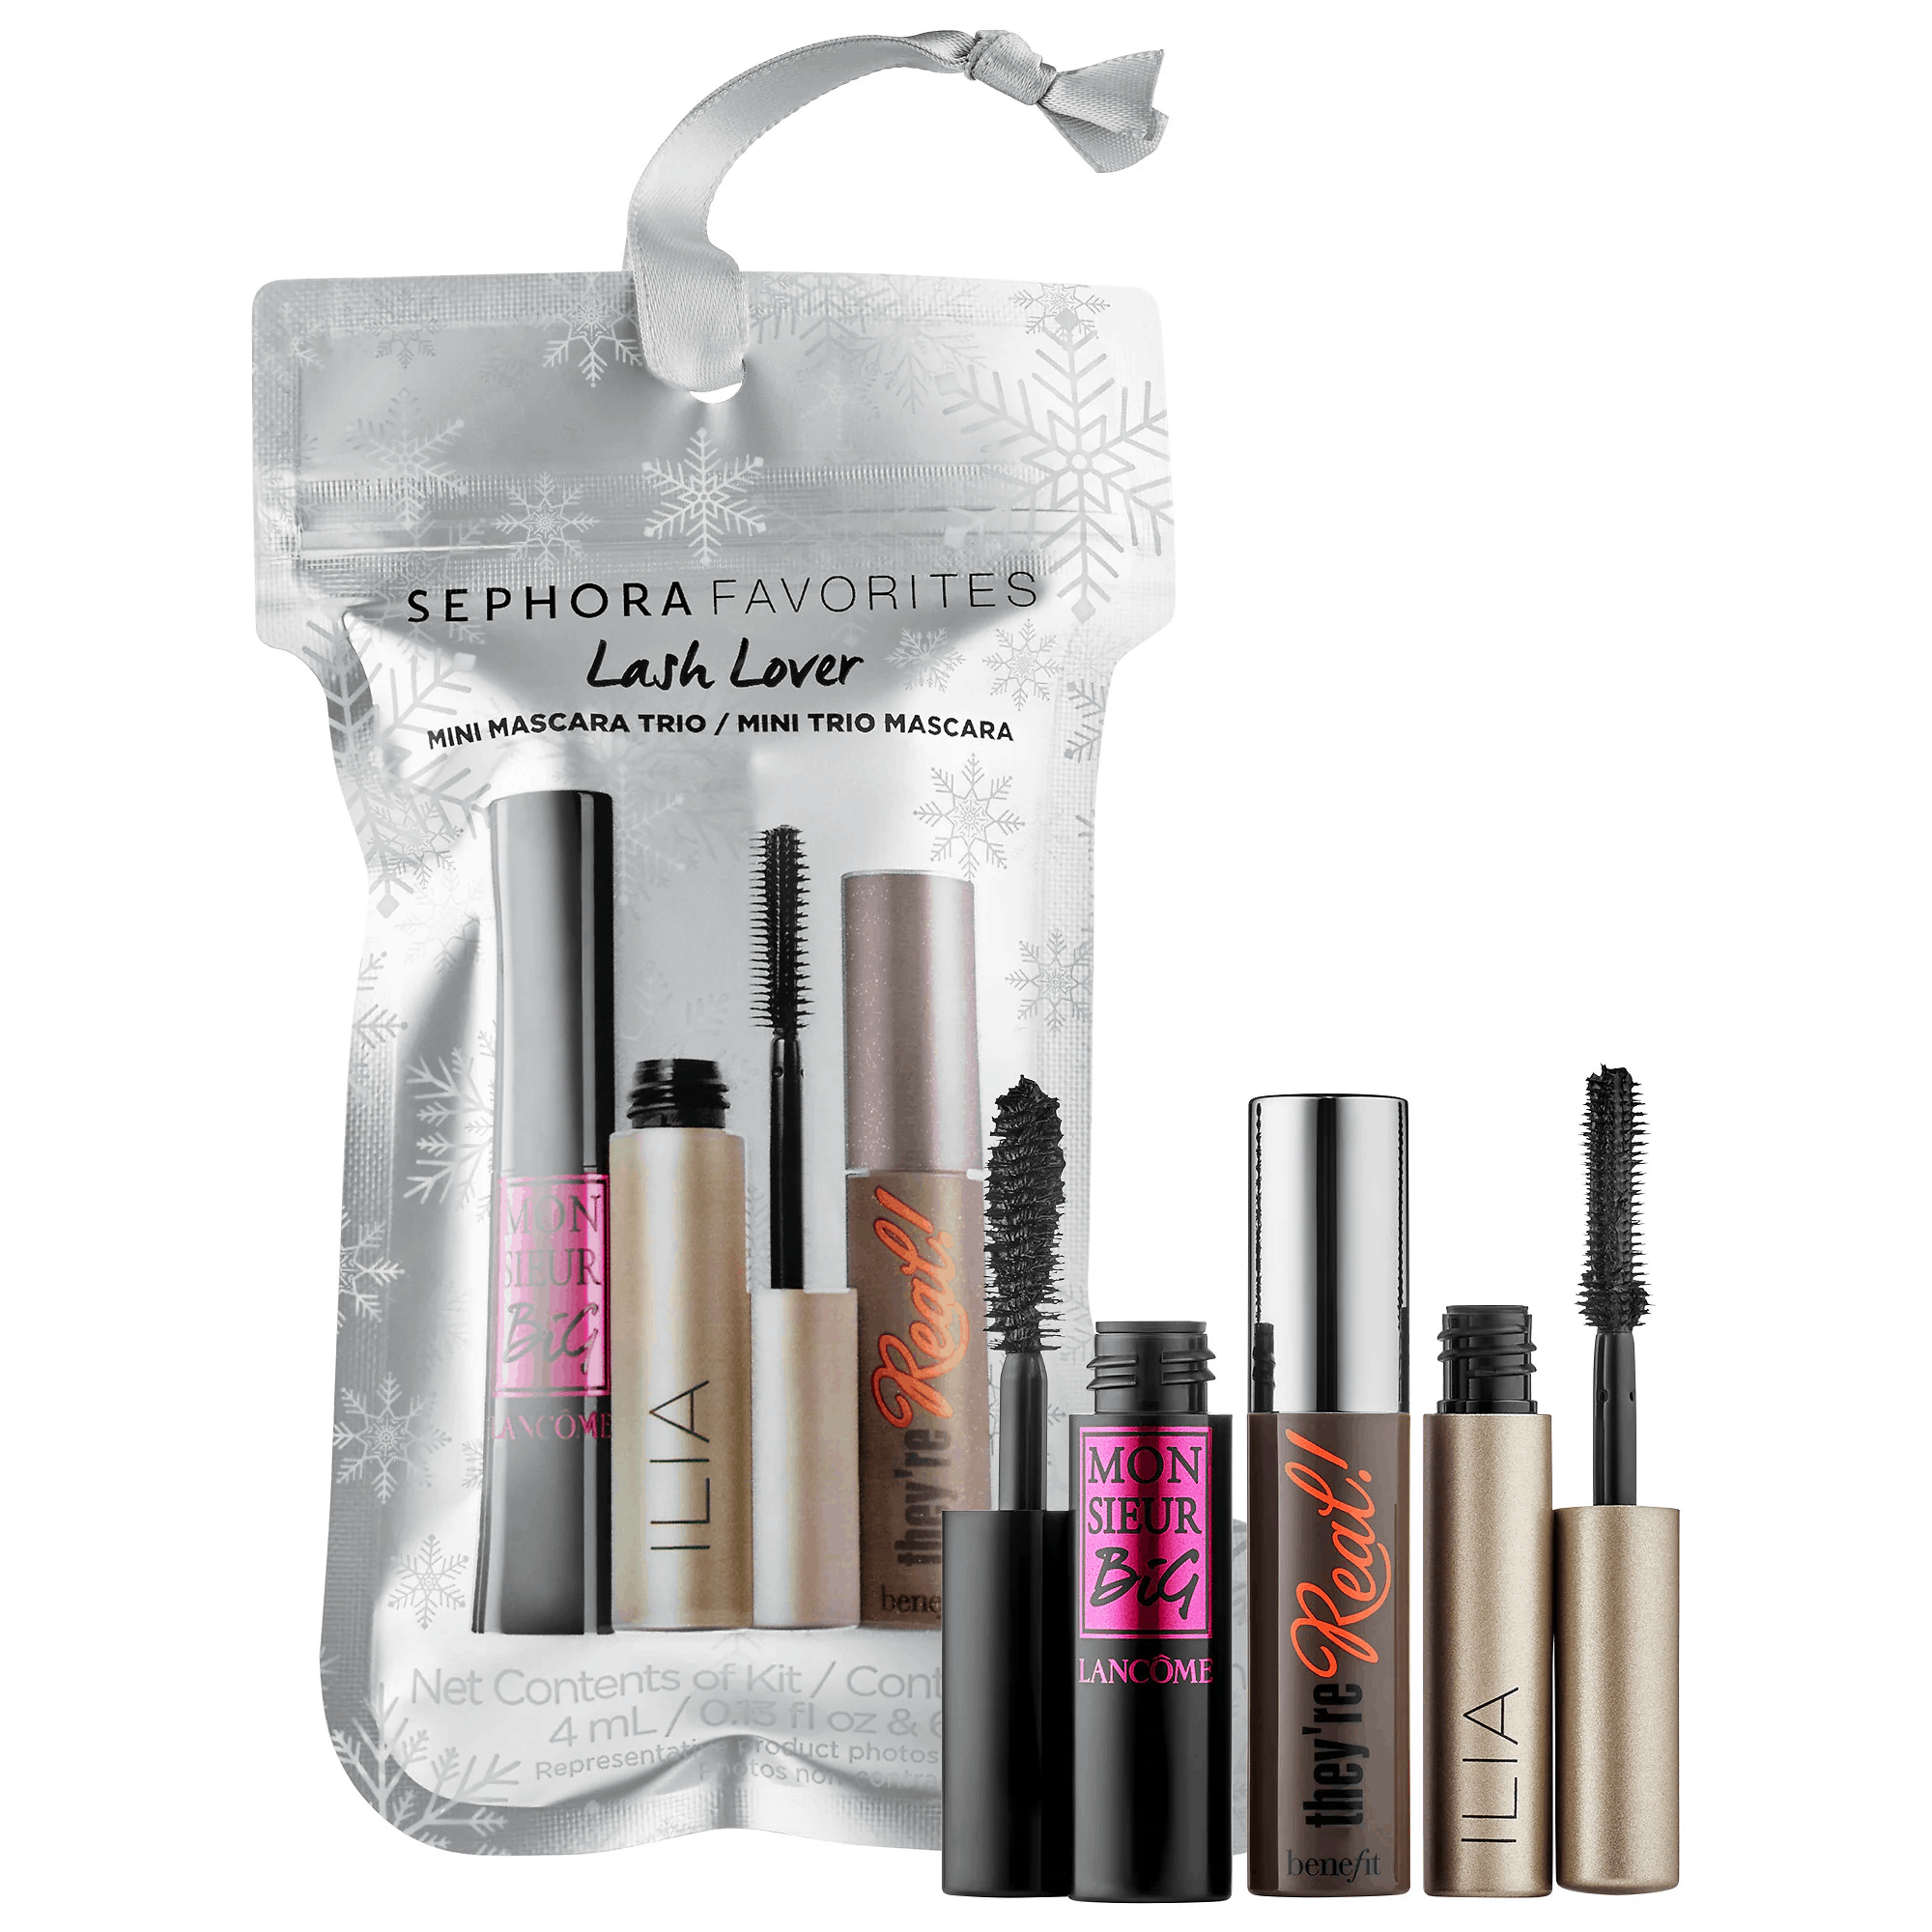 Six New Sephora Kits Available Now + Coupons! - hello subscription